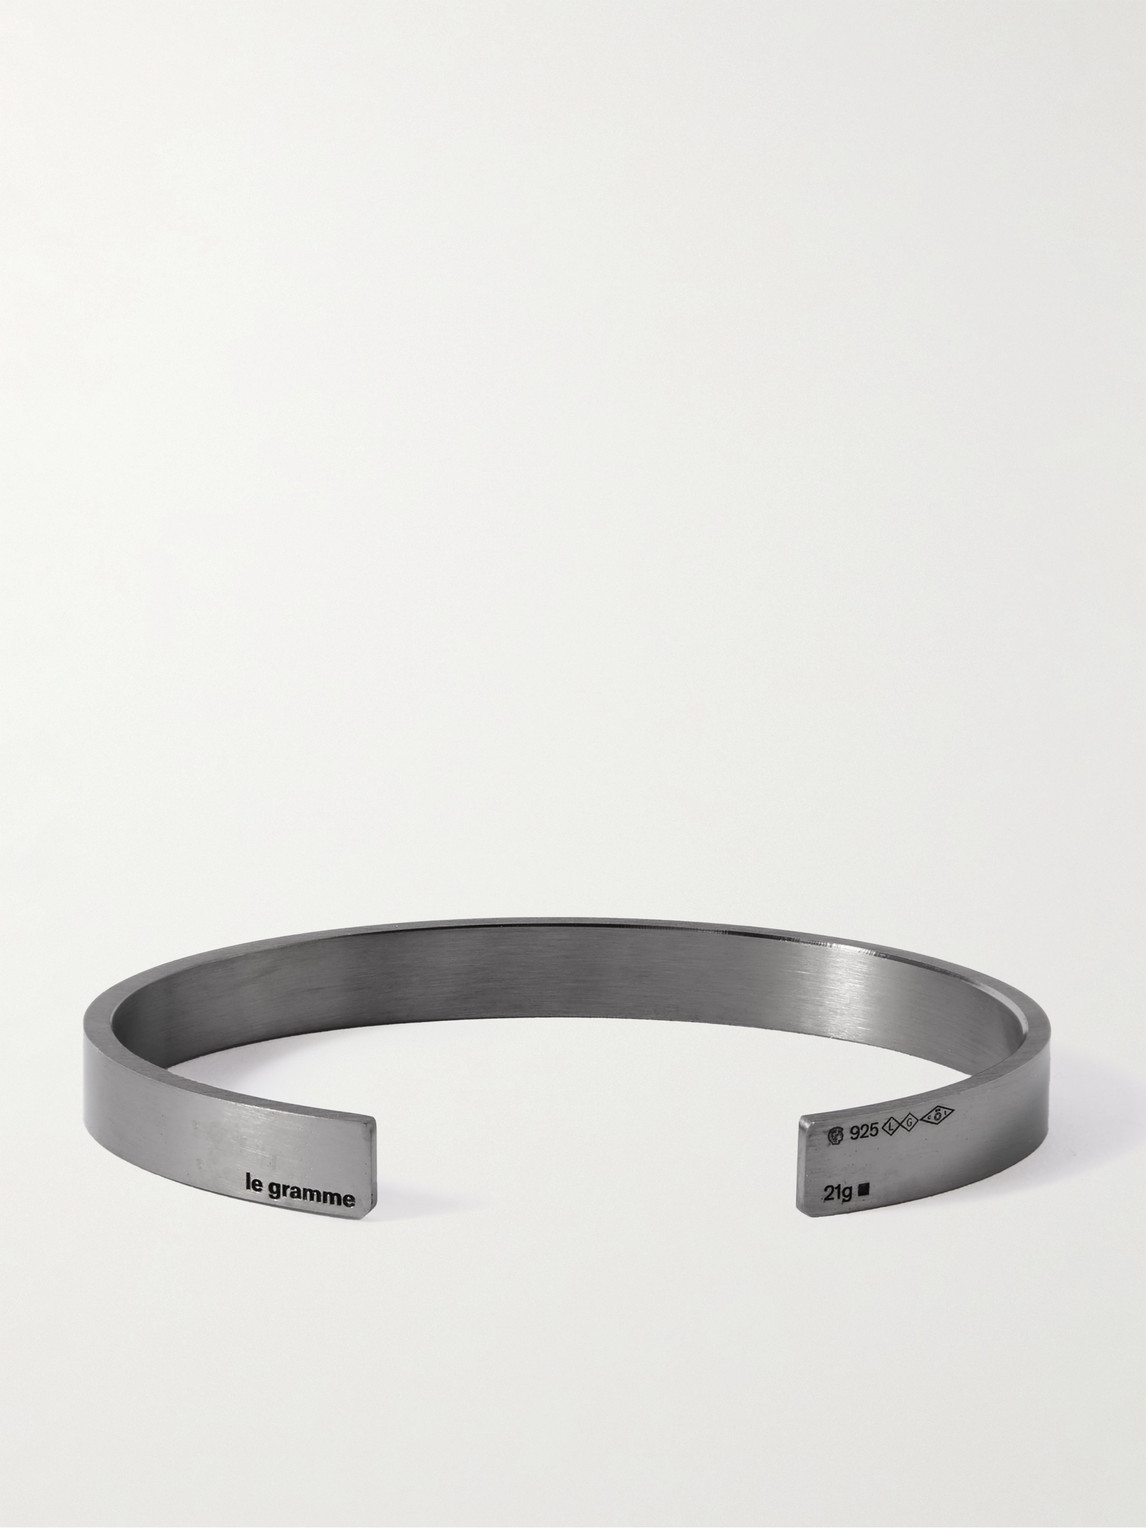 Shop Le Gramme 21g Brushed Sterling Silver Cuff